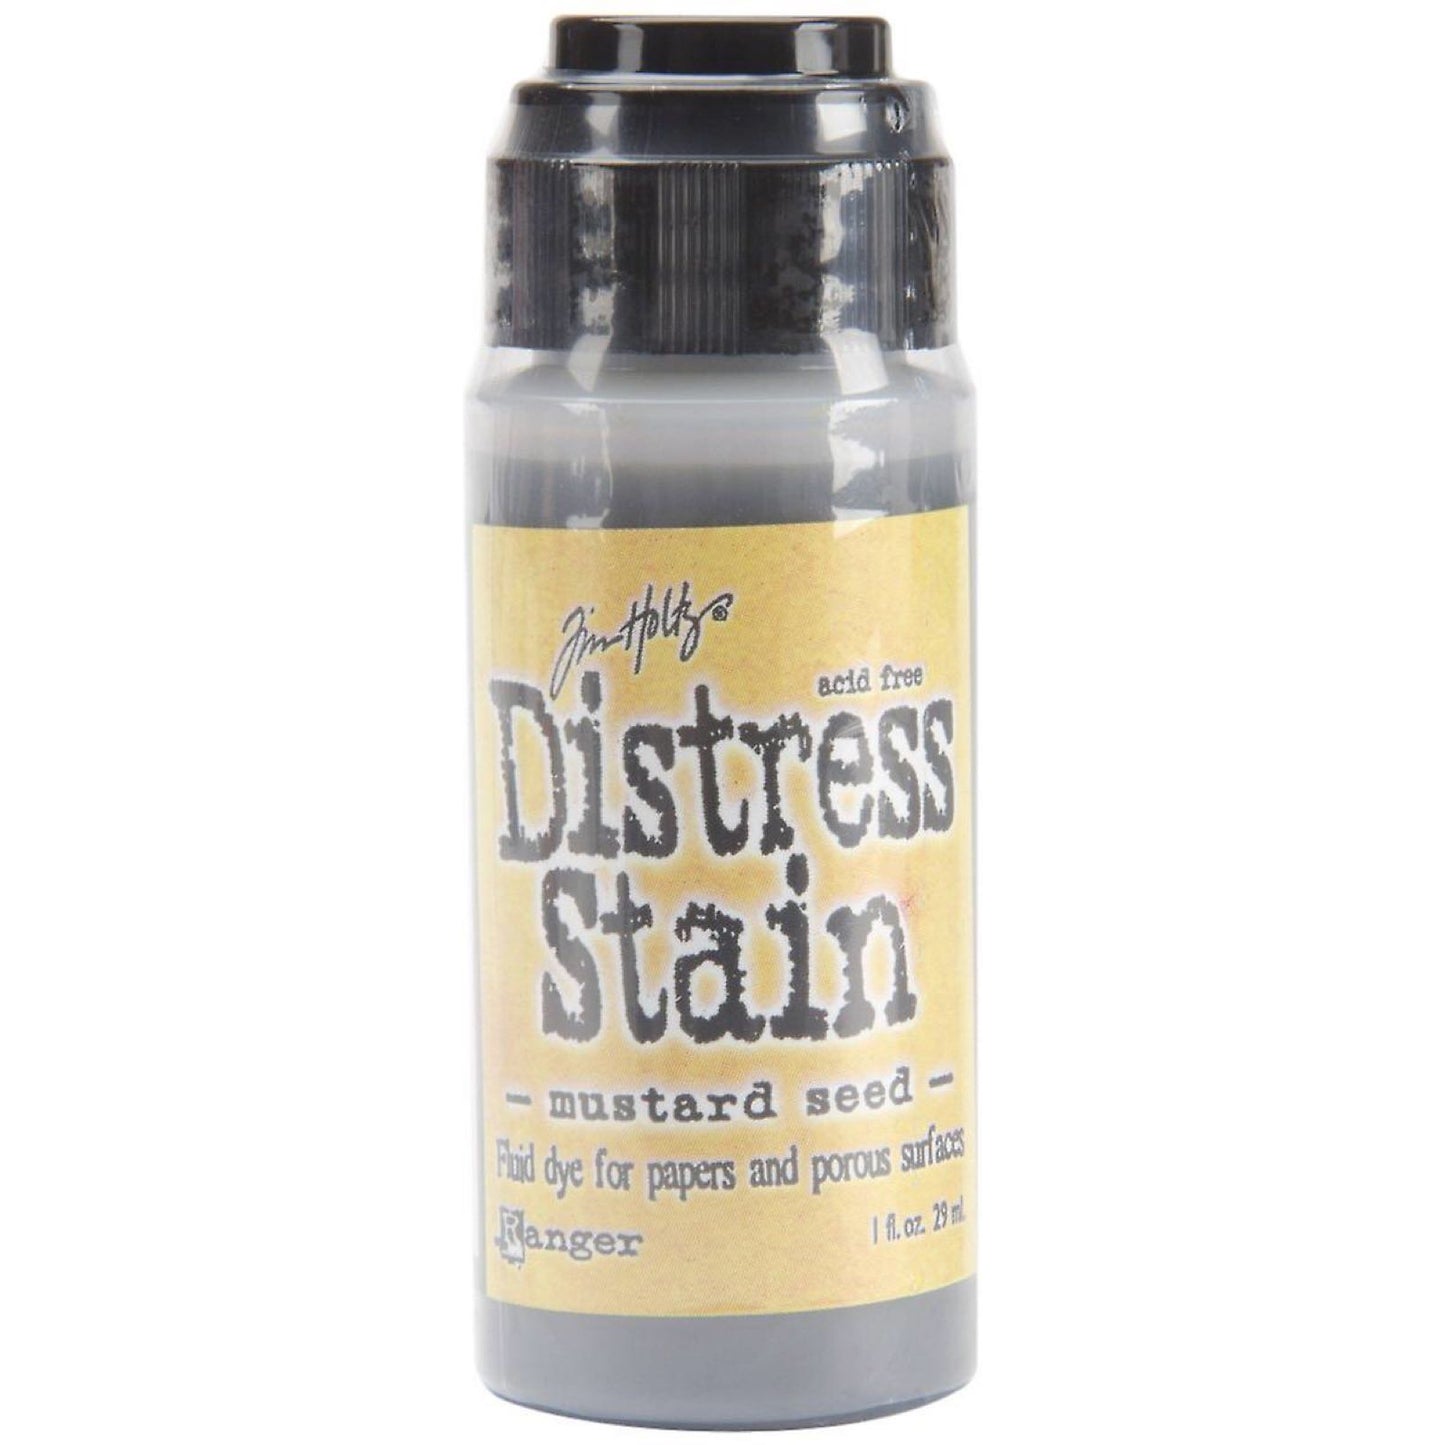 Distress stain  Mustard seed